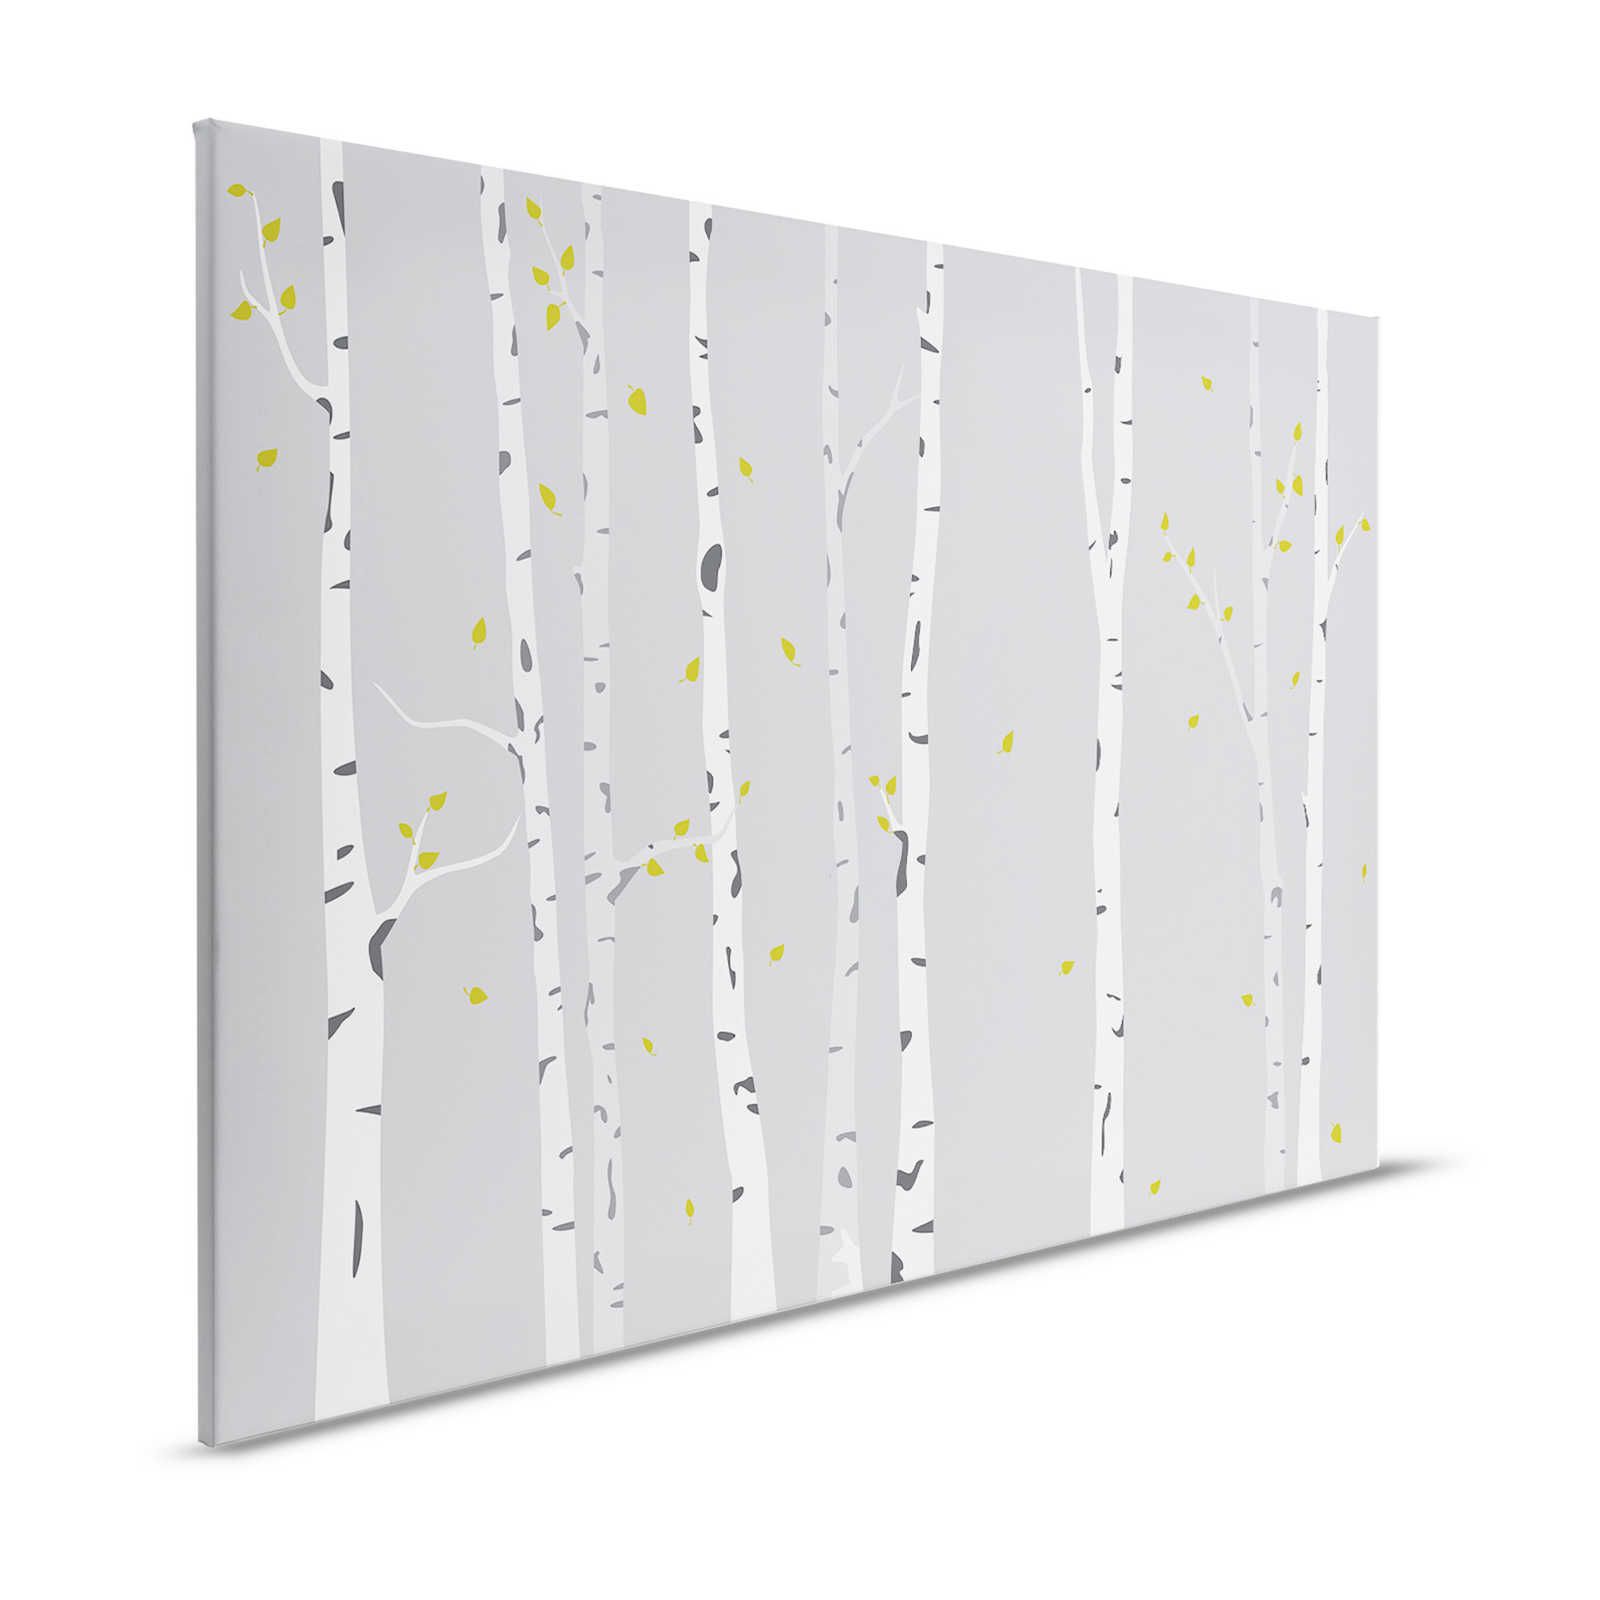 Canvas with painted birch forest for children's room - 120 cm x 80 cm
